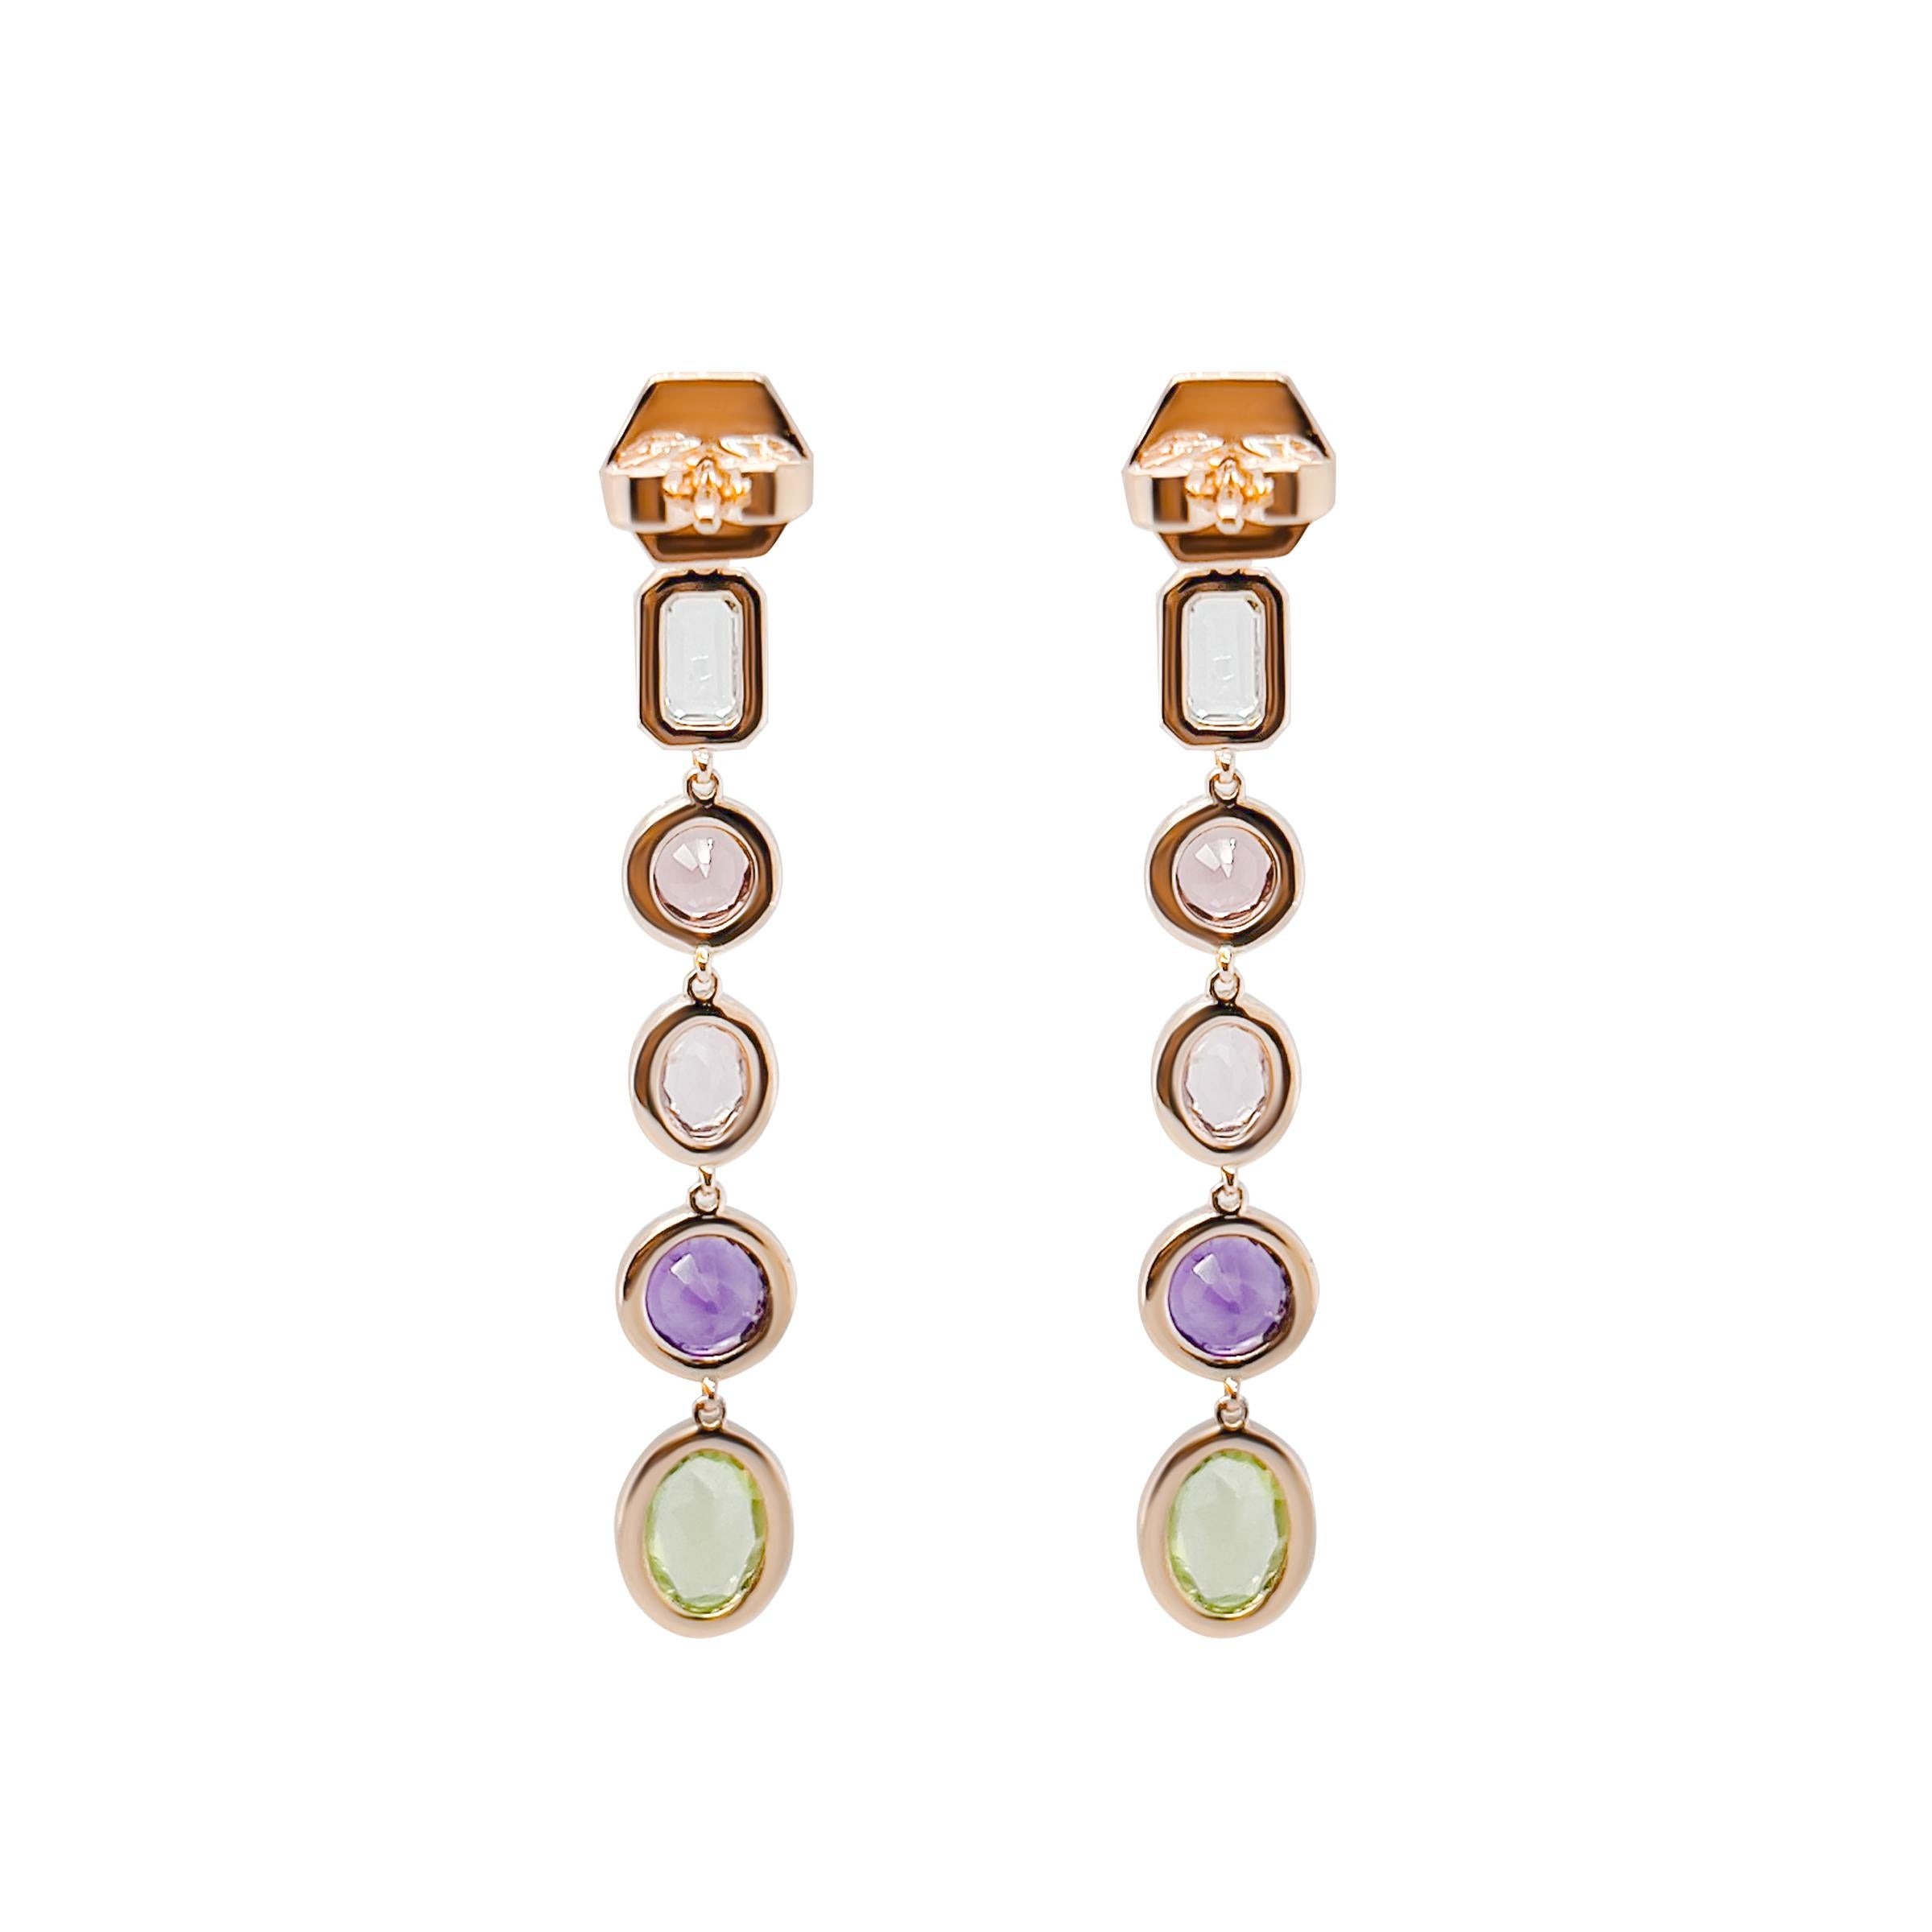 This stunning pair of 18k rose gold earrings feature a eye catching array of gemstones. Each earring is crafted with the precise balance of natural spinel, peridot, amethyst, and aquamarine. In addition, pave set diamonds are delicately surround the